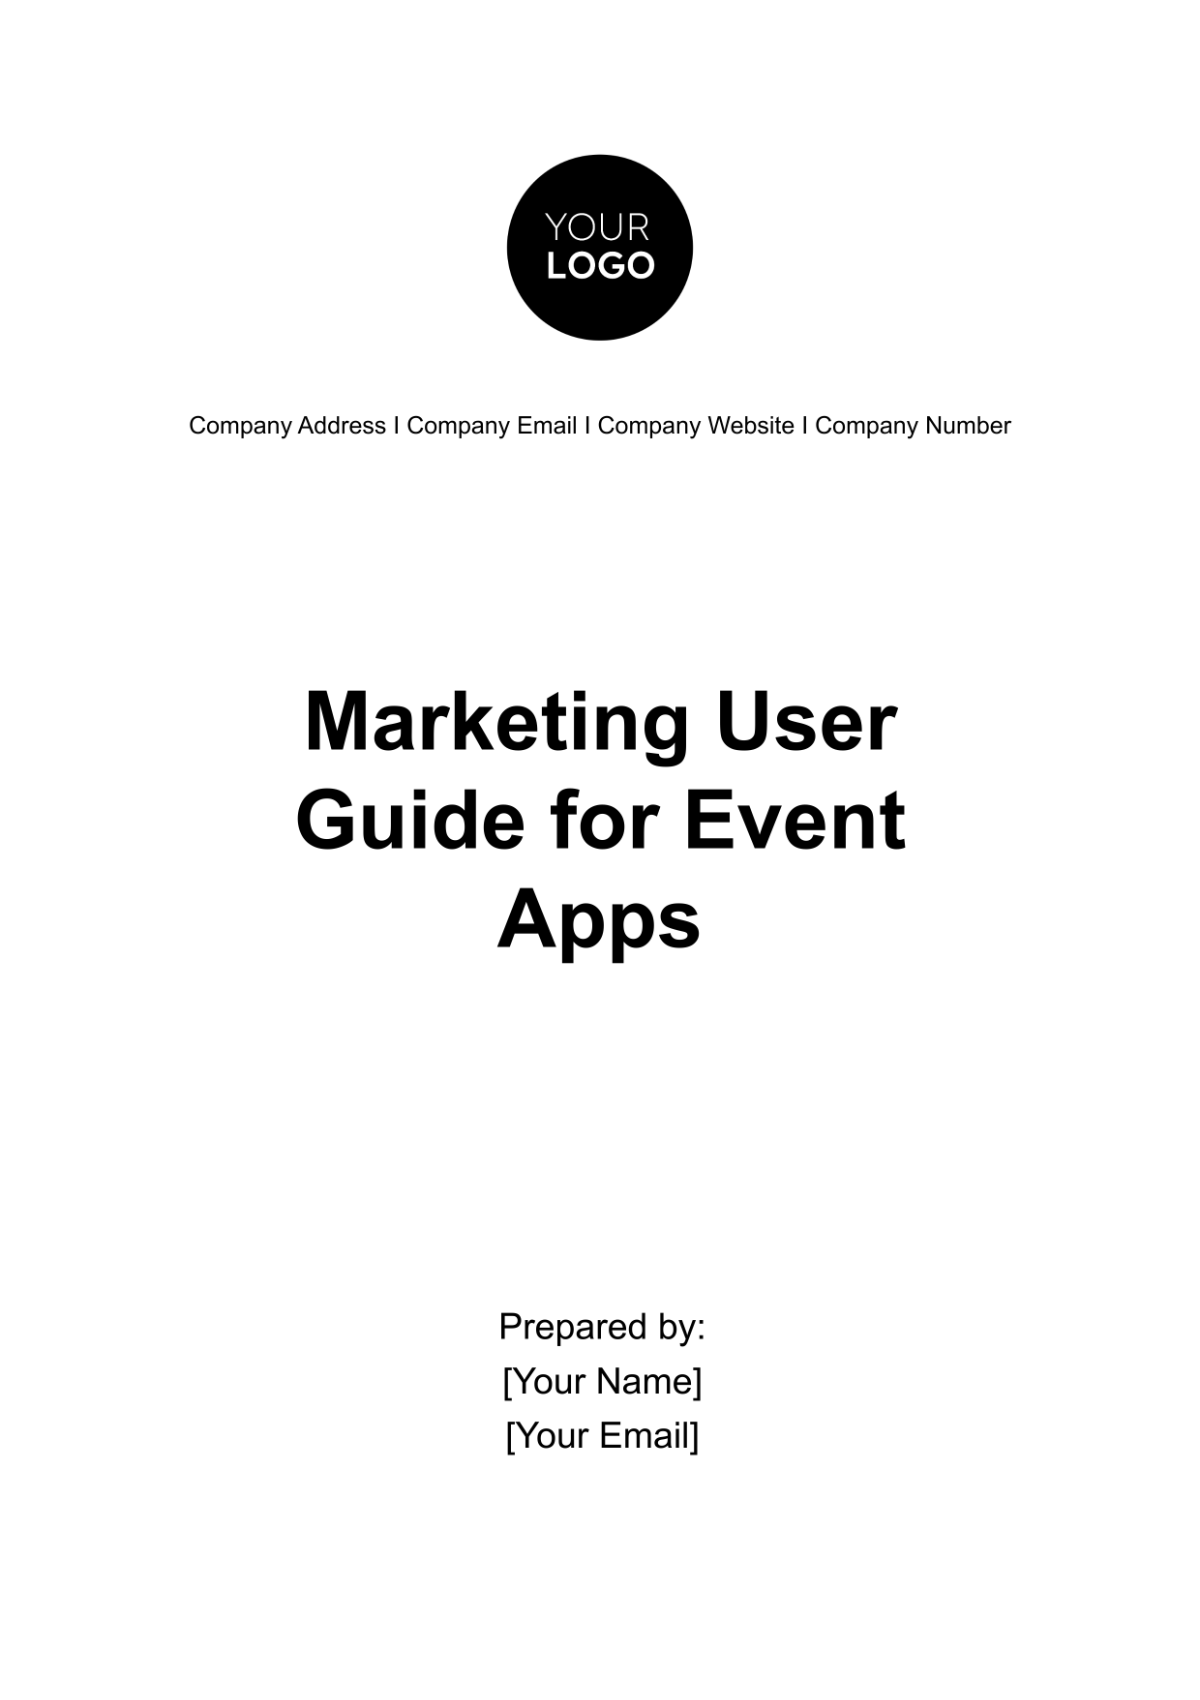 Marketing User Guide for Event Apps Template